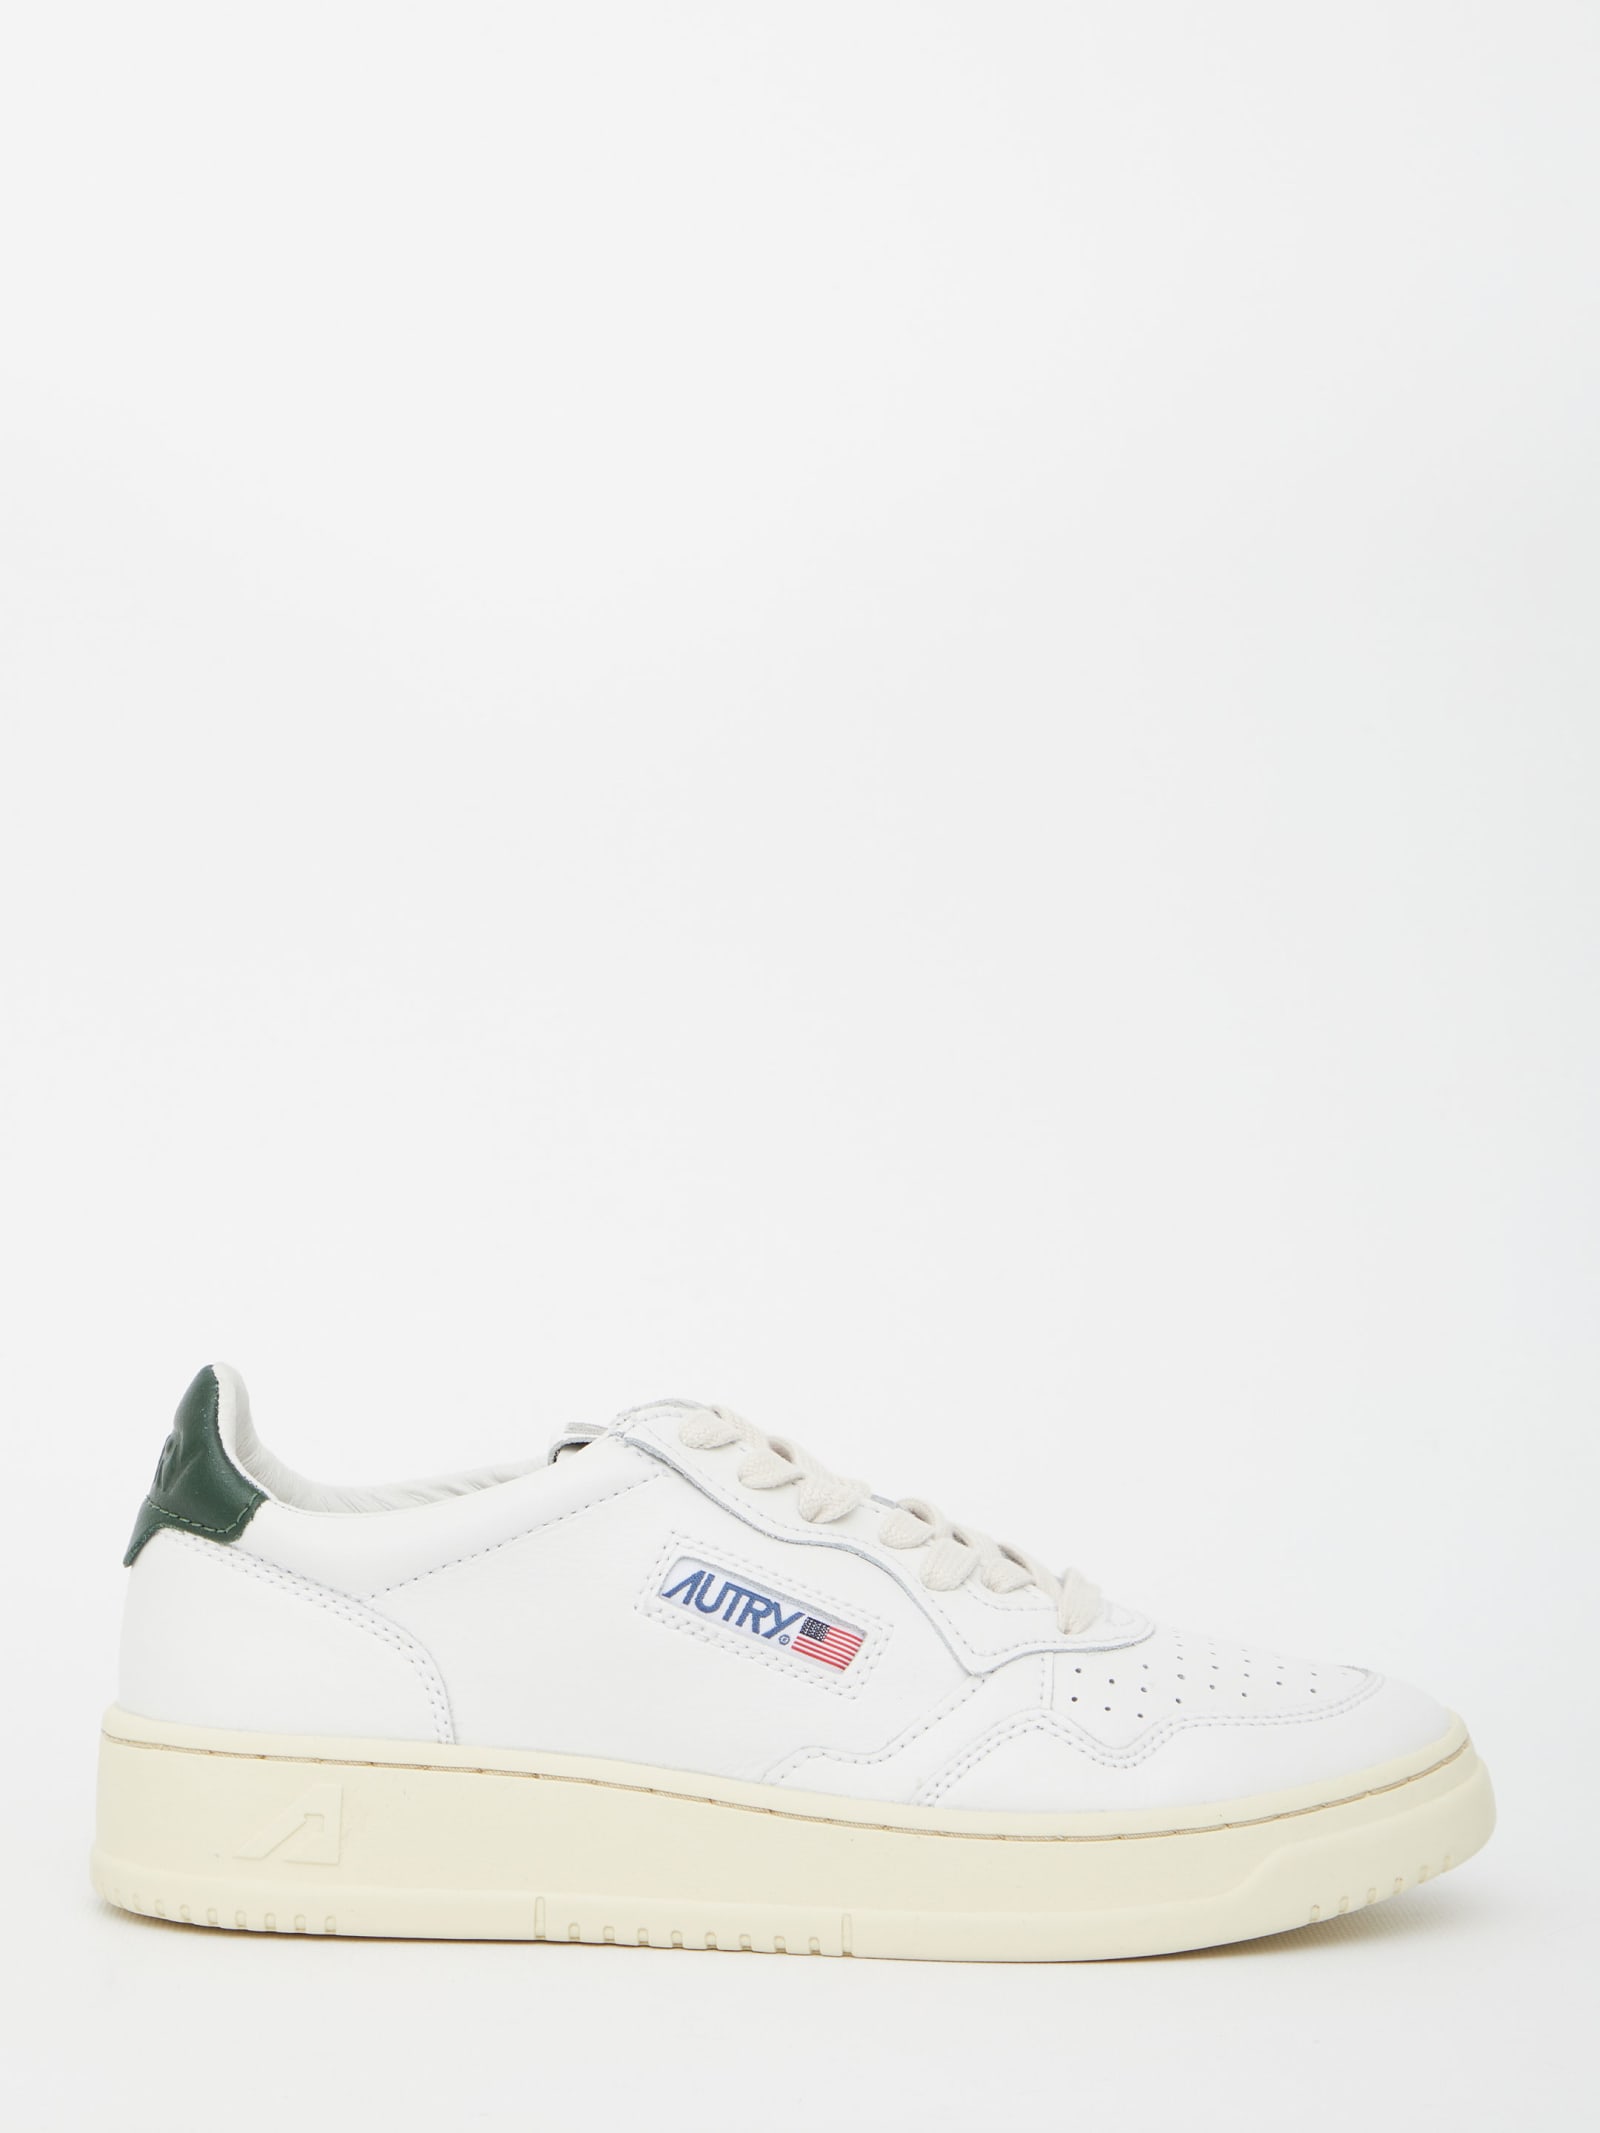 Autry White And Green 01 Sneakers